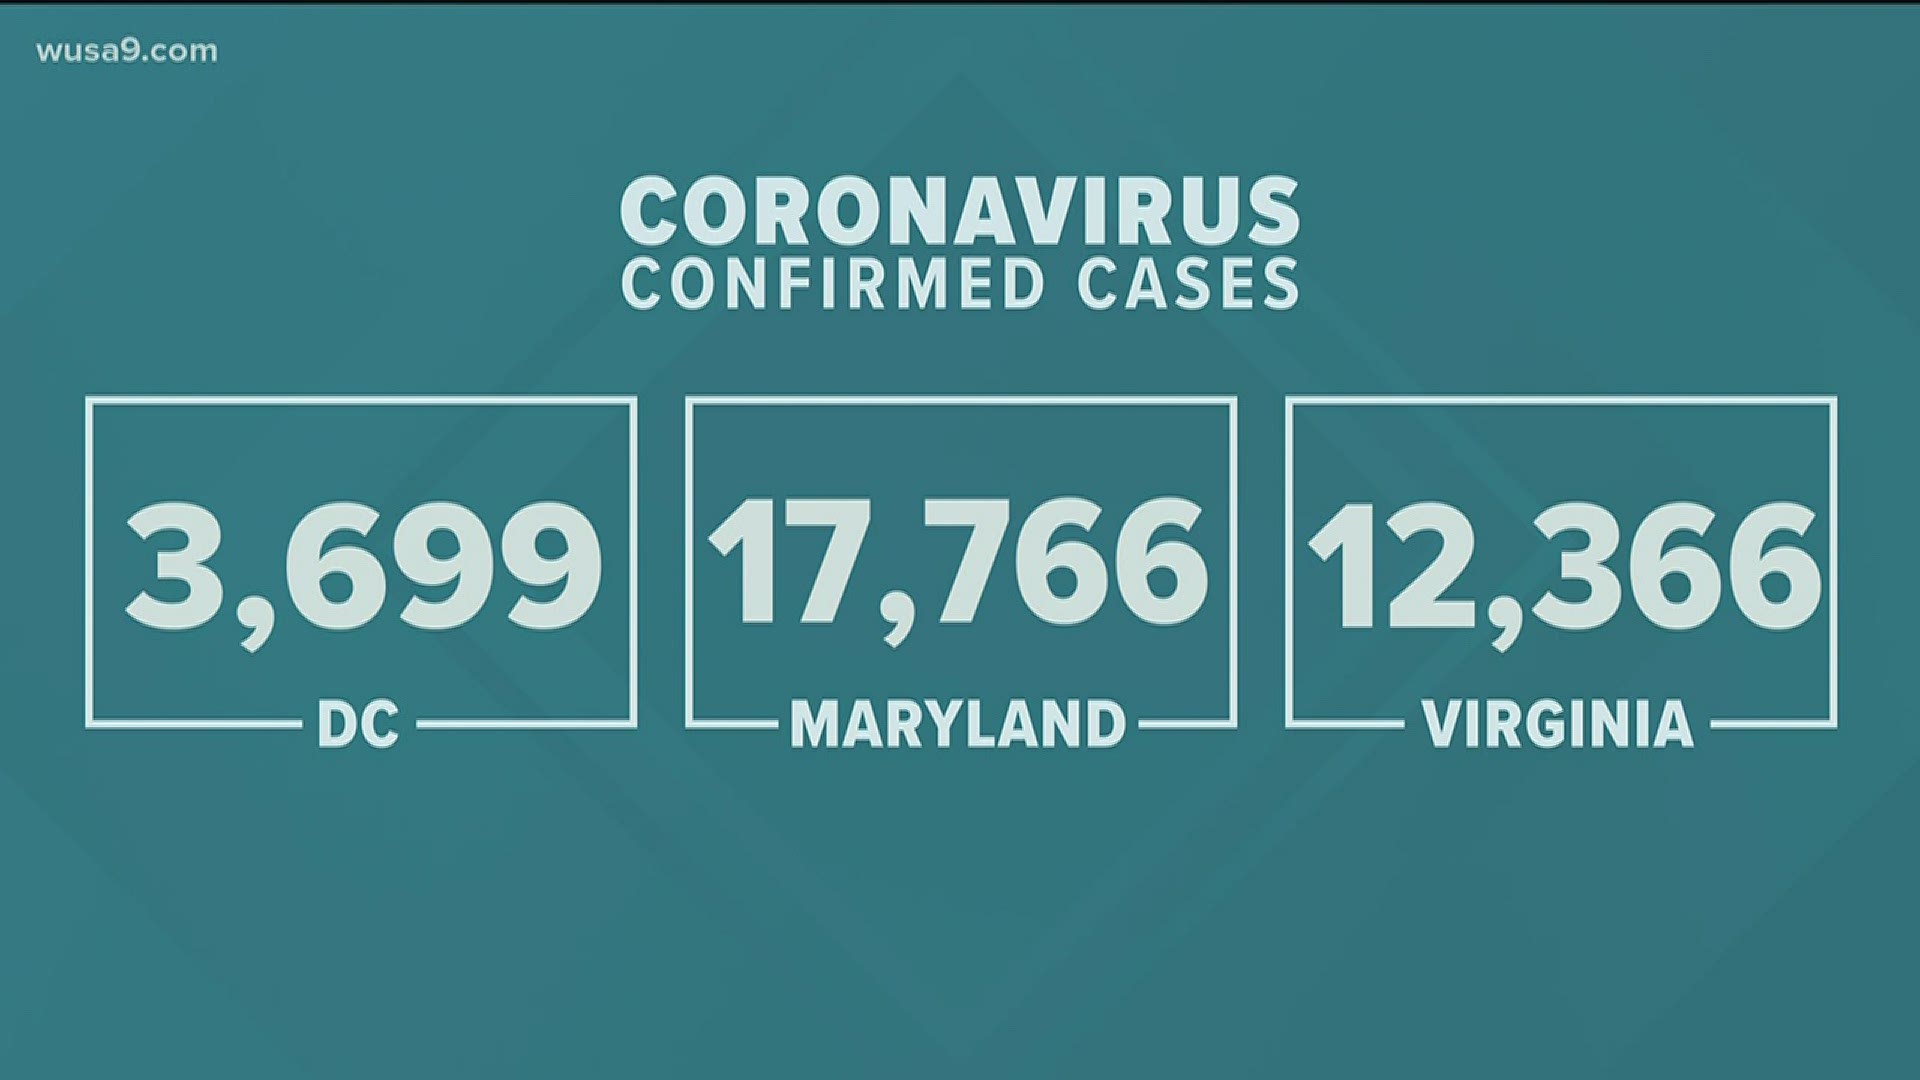 Maryland and Virginia saw their highest single-day increase in cases and the CDC has added six new symptoms such as chills and muscle pain to official symptom list.